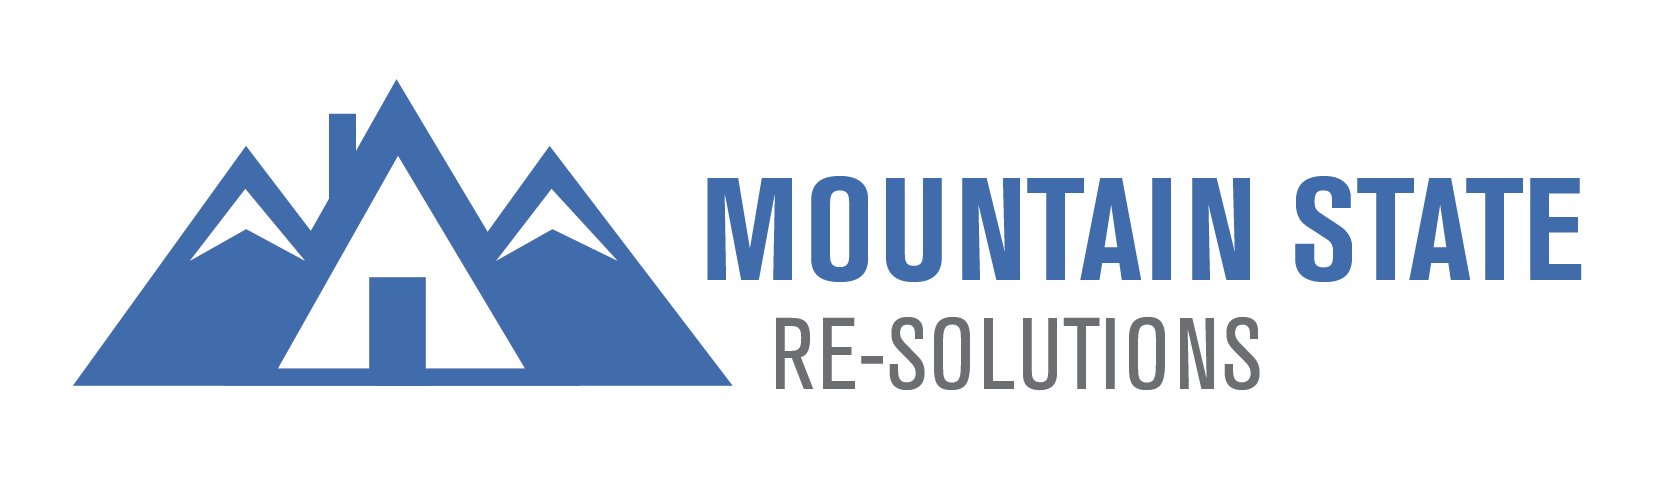 Mountain State RE-Solutions logo